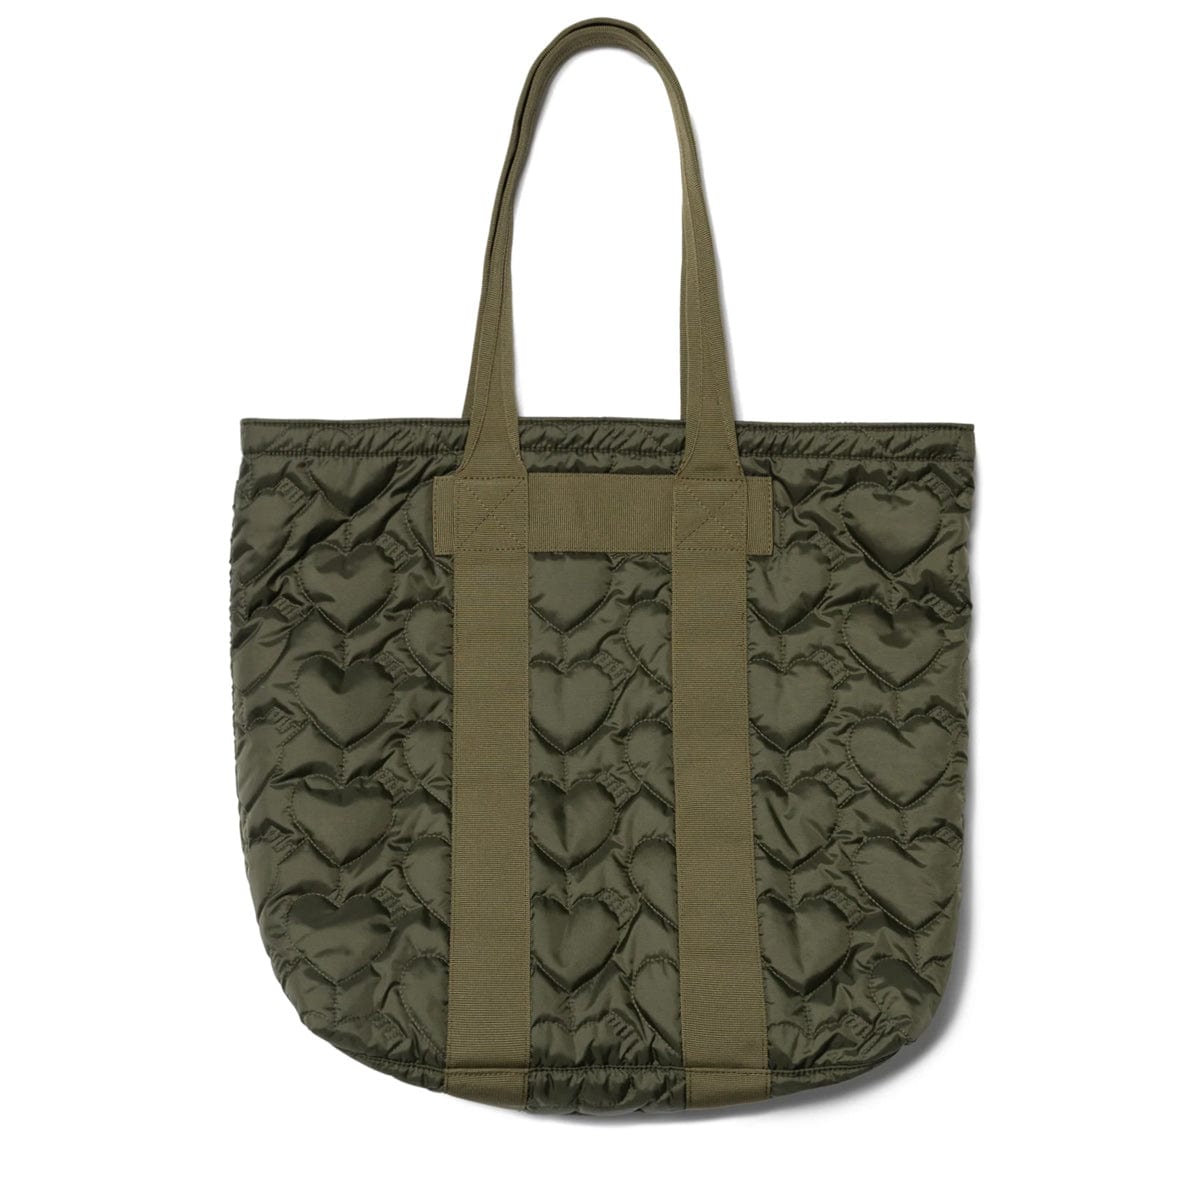 HEART QUILTING TOTE OLIVE DRAB | Bodega